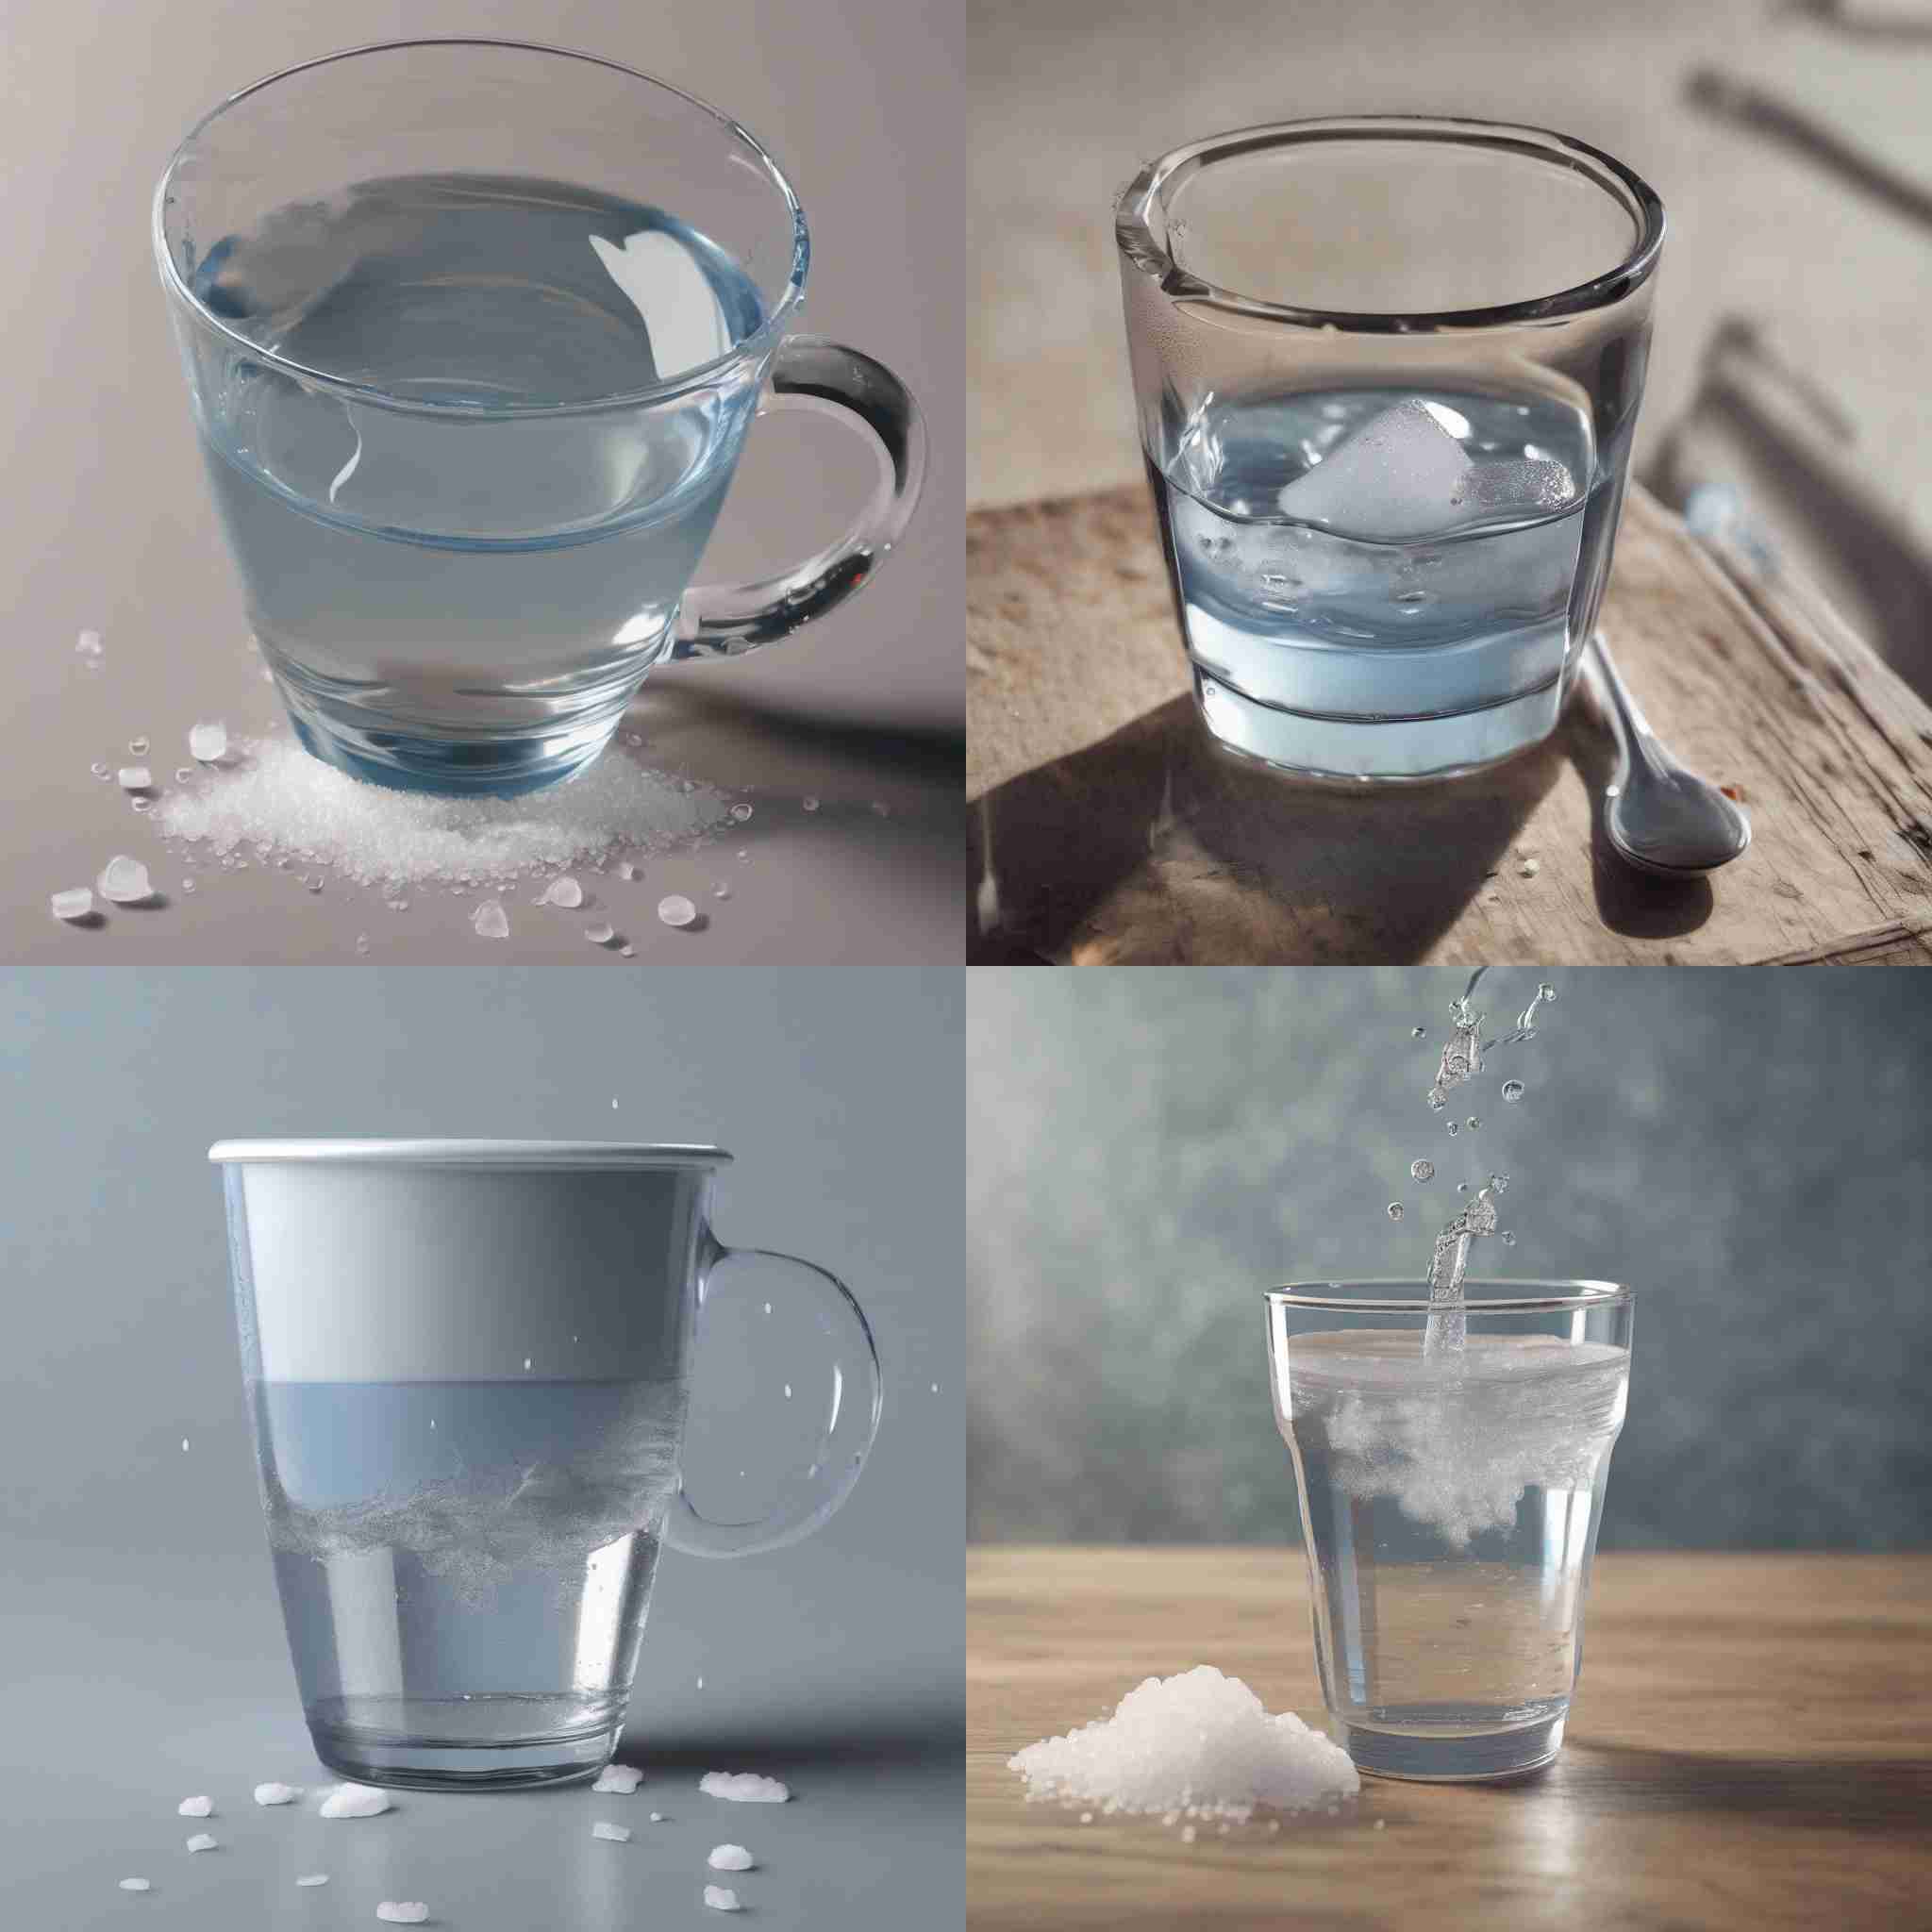 A cup of water with salt just added